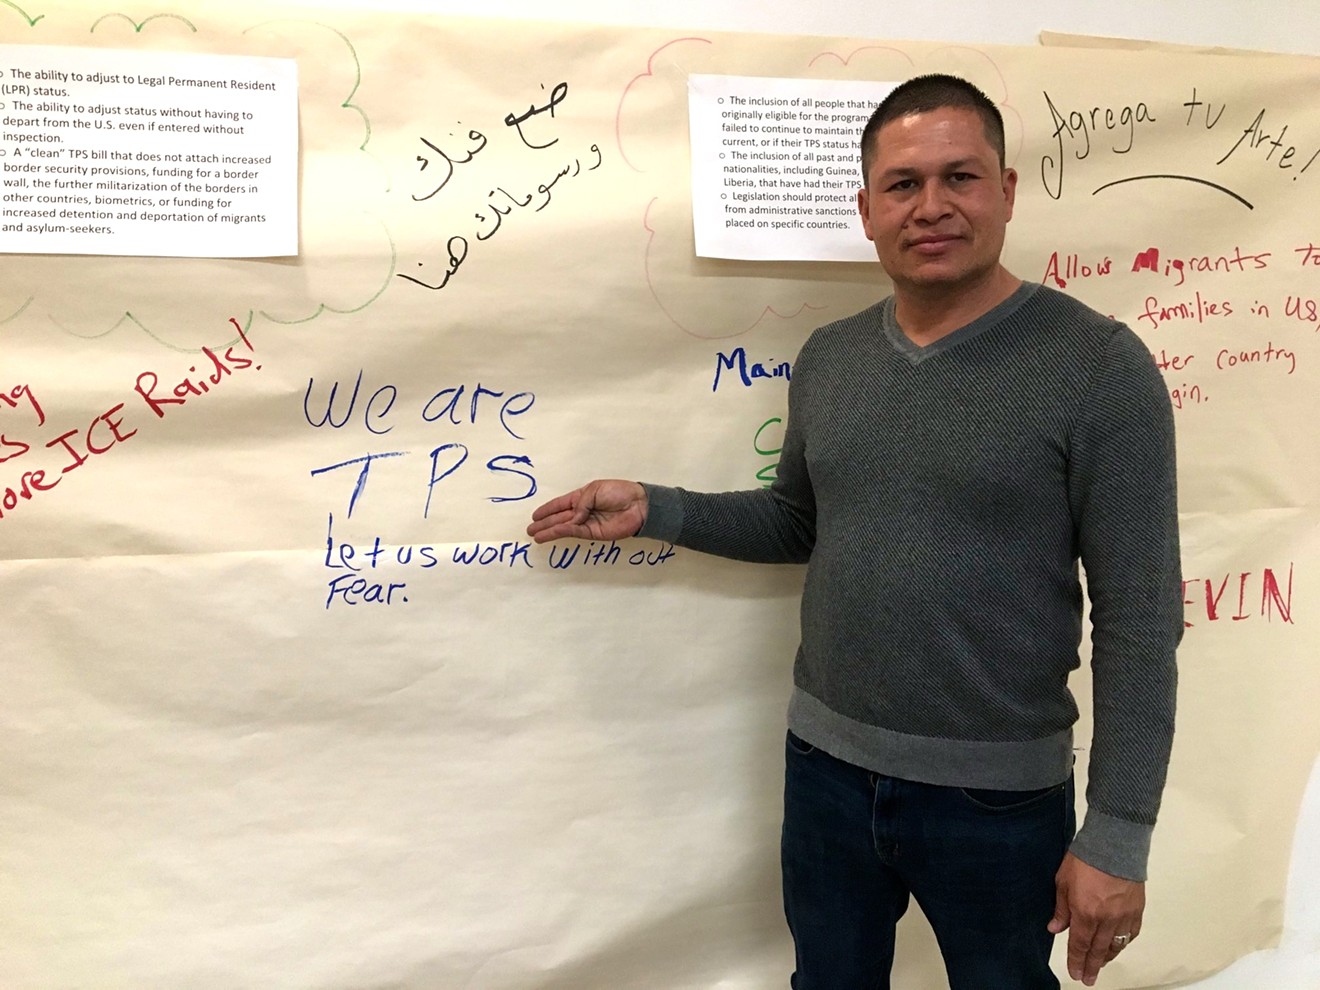 Jorge Velasquez is a TPS holder from El Salvador and has lived in Colorado for two decades.